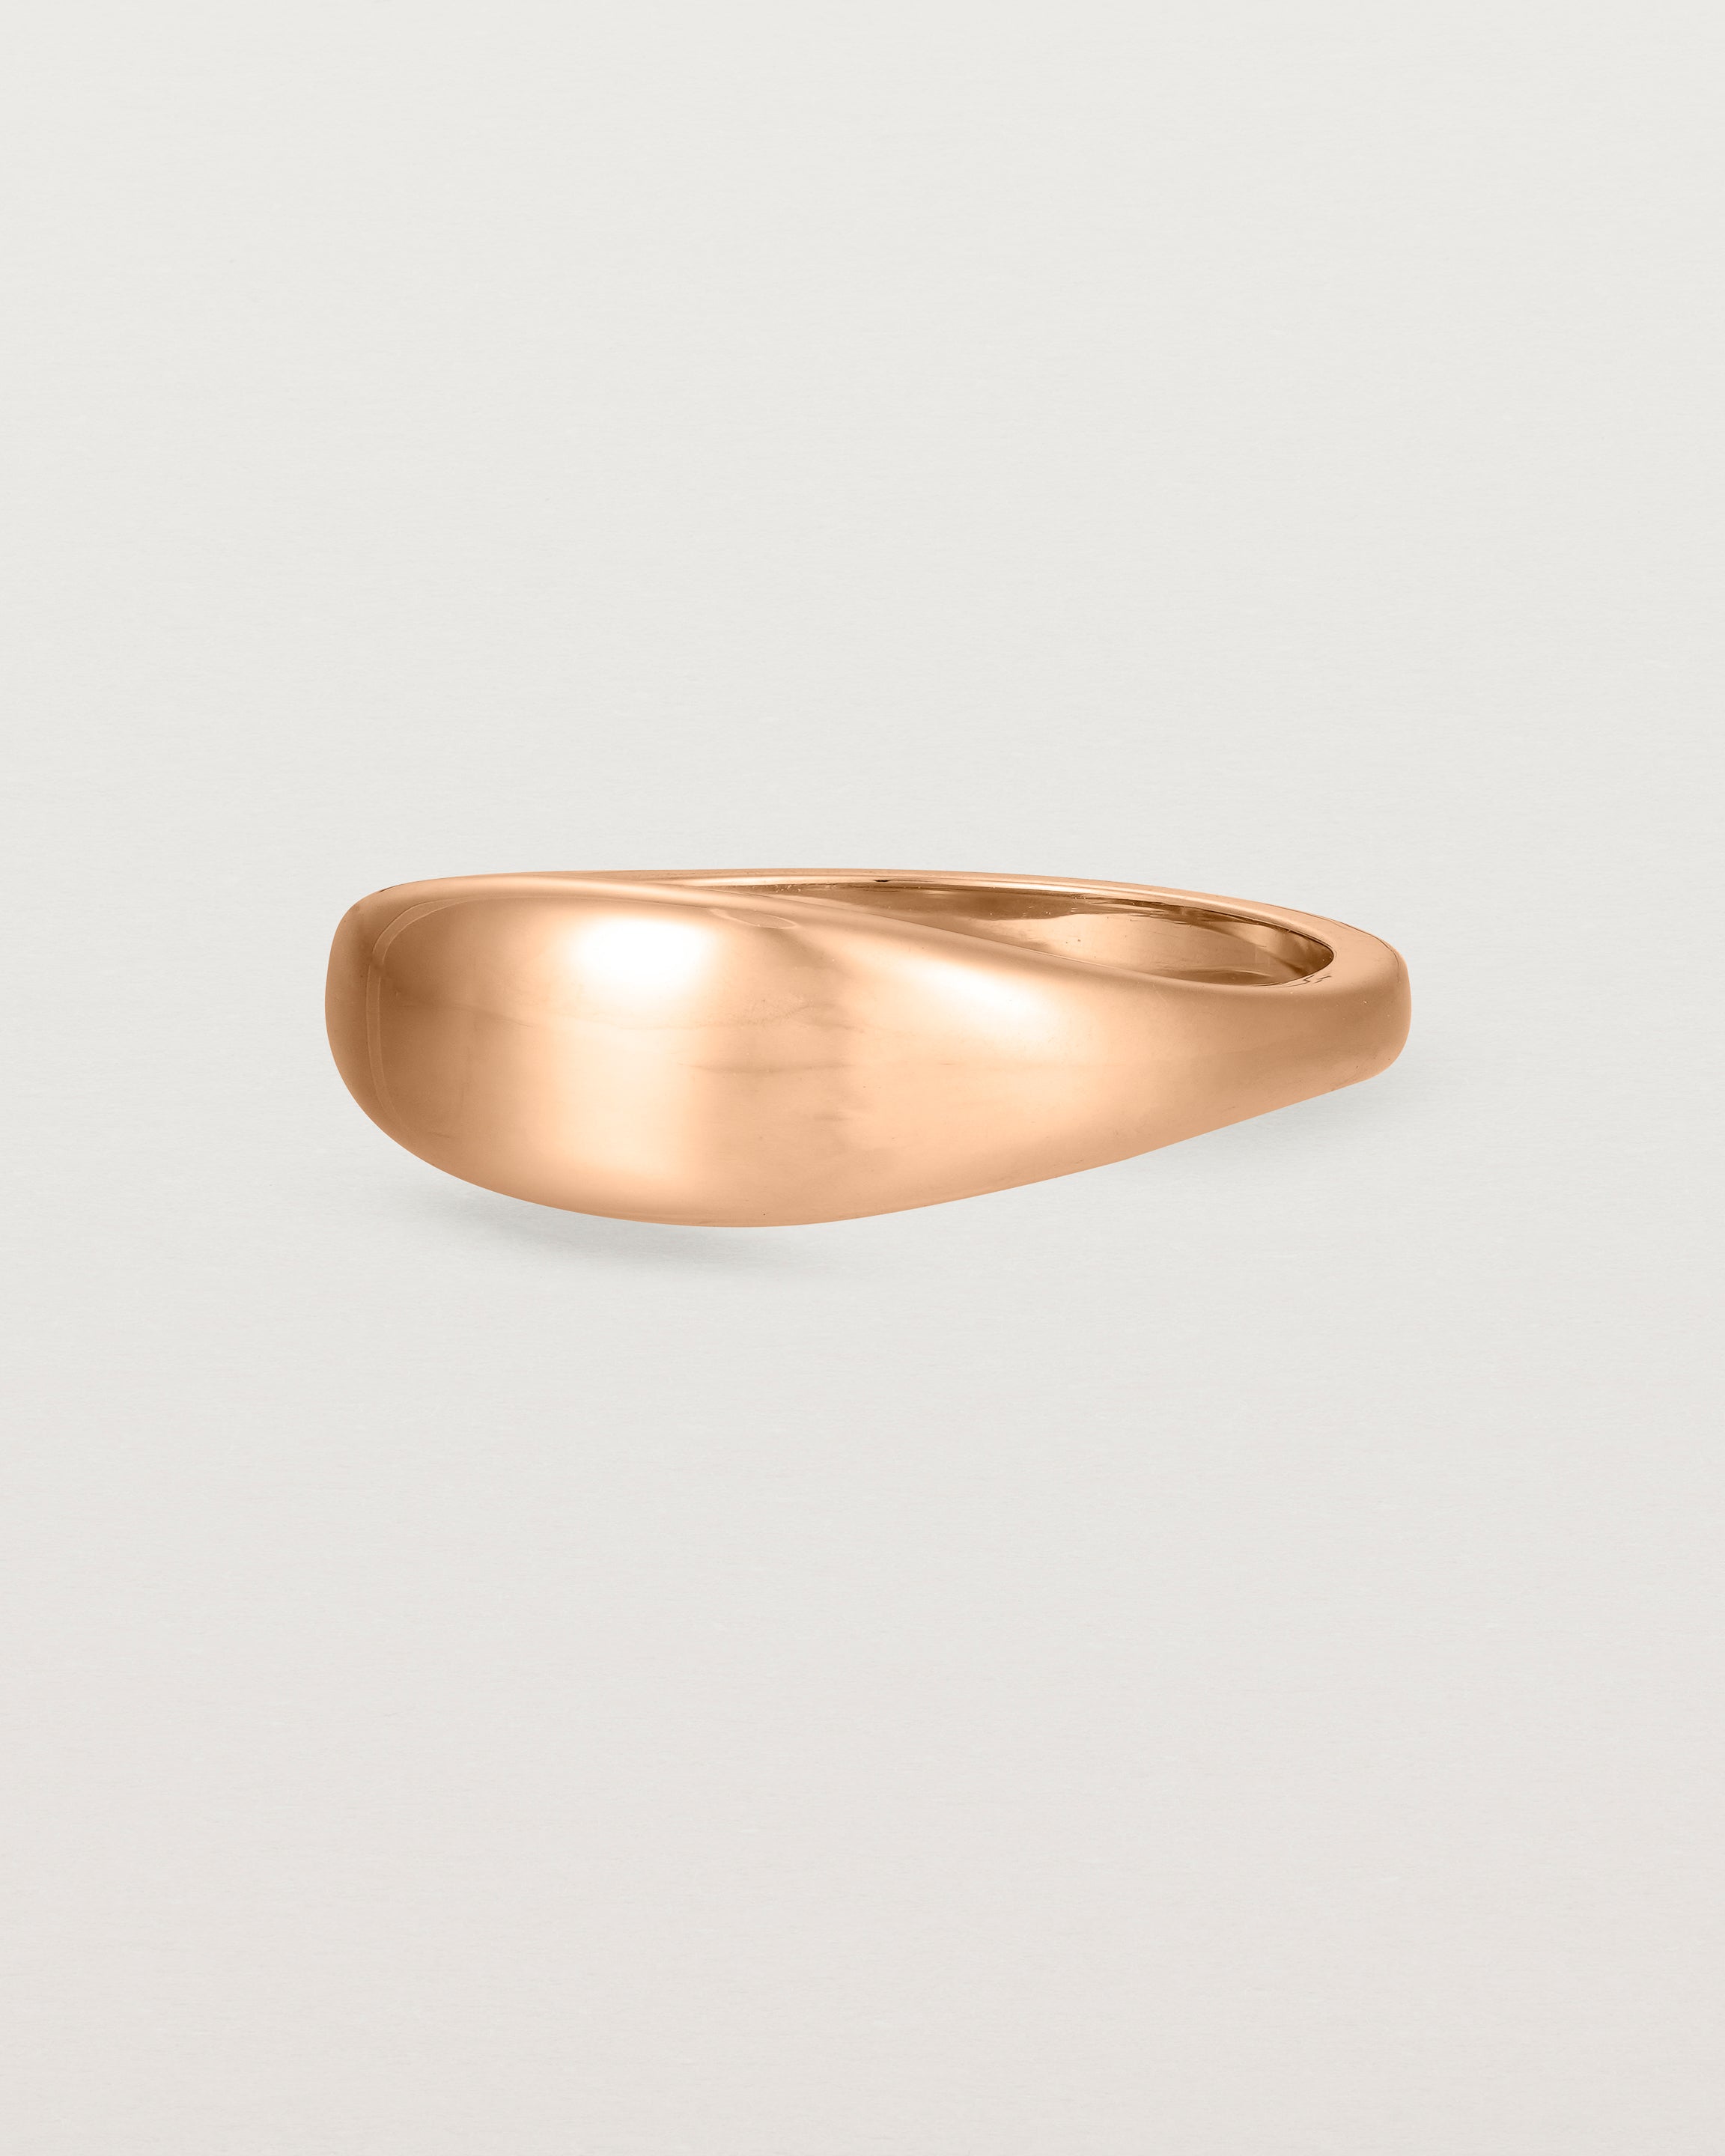 Angled view of the Seule Ring in Rose Gold.